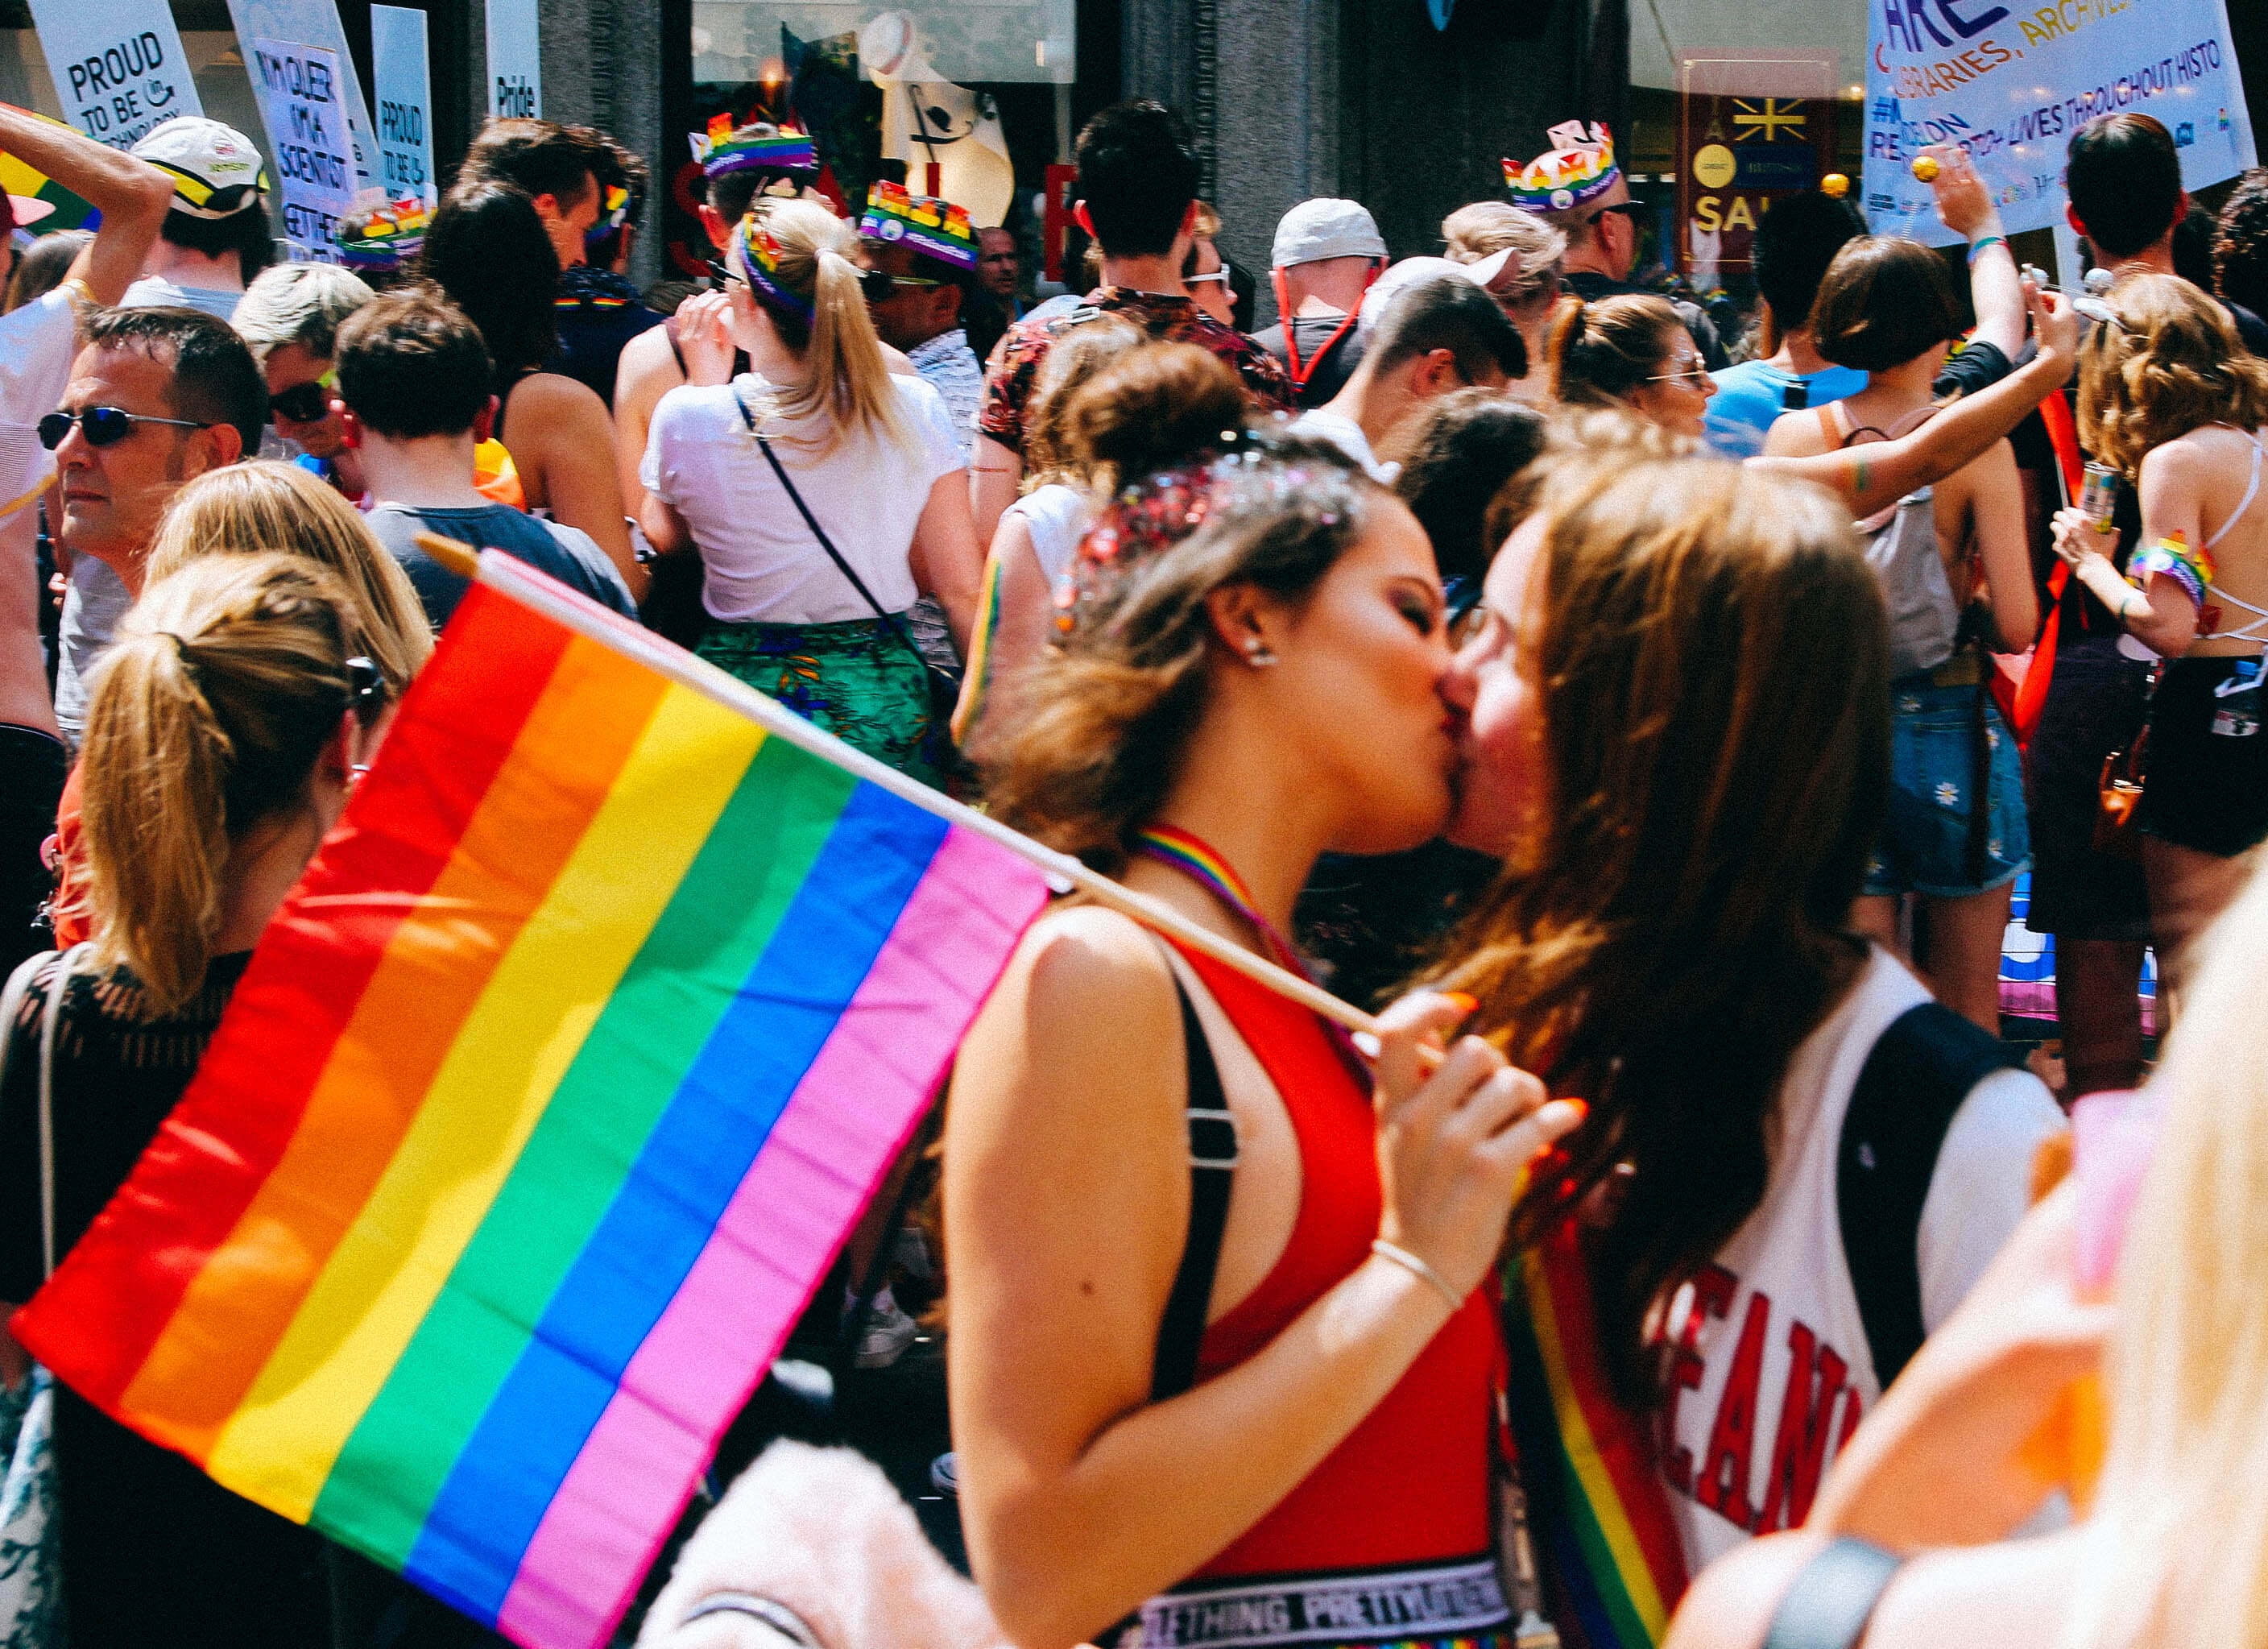 Couple kissing in crowd at Pride march